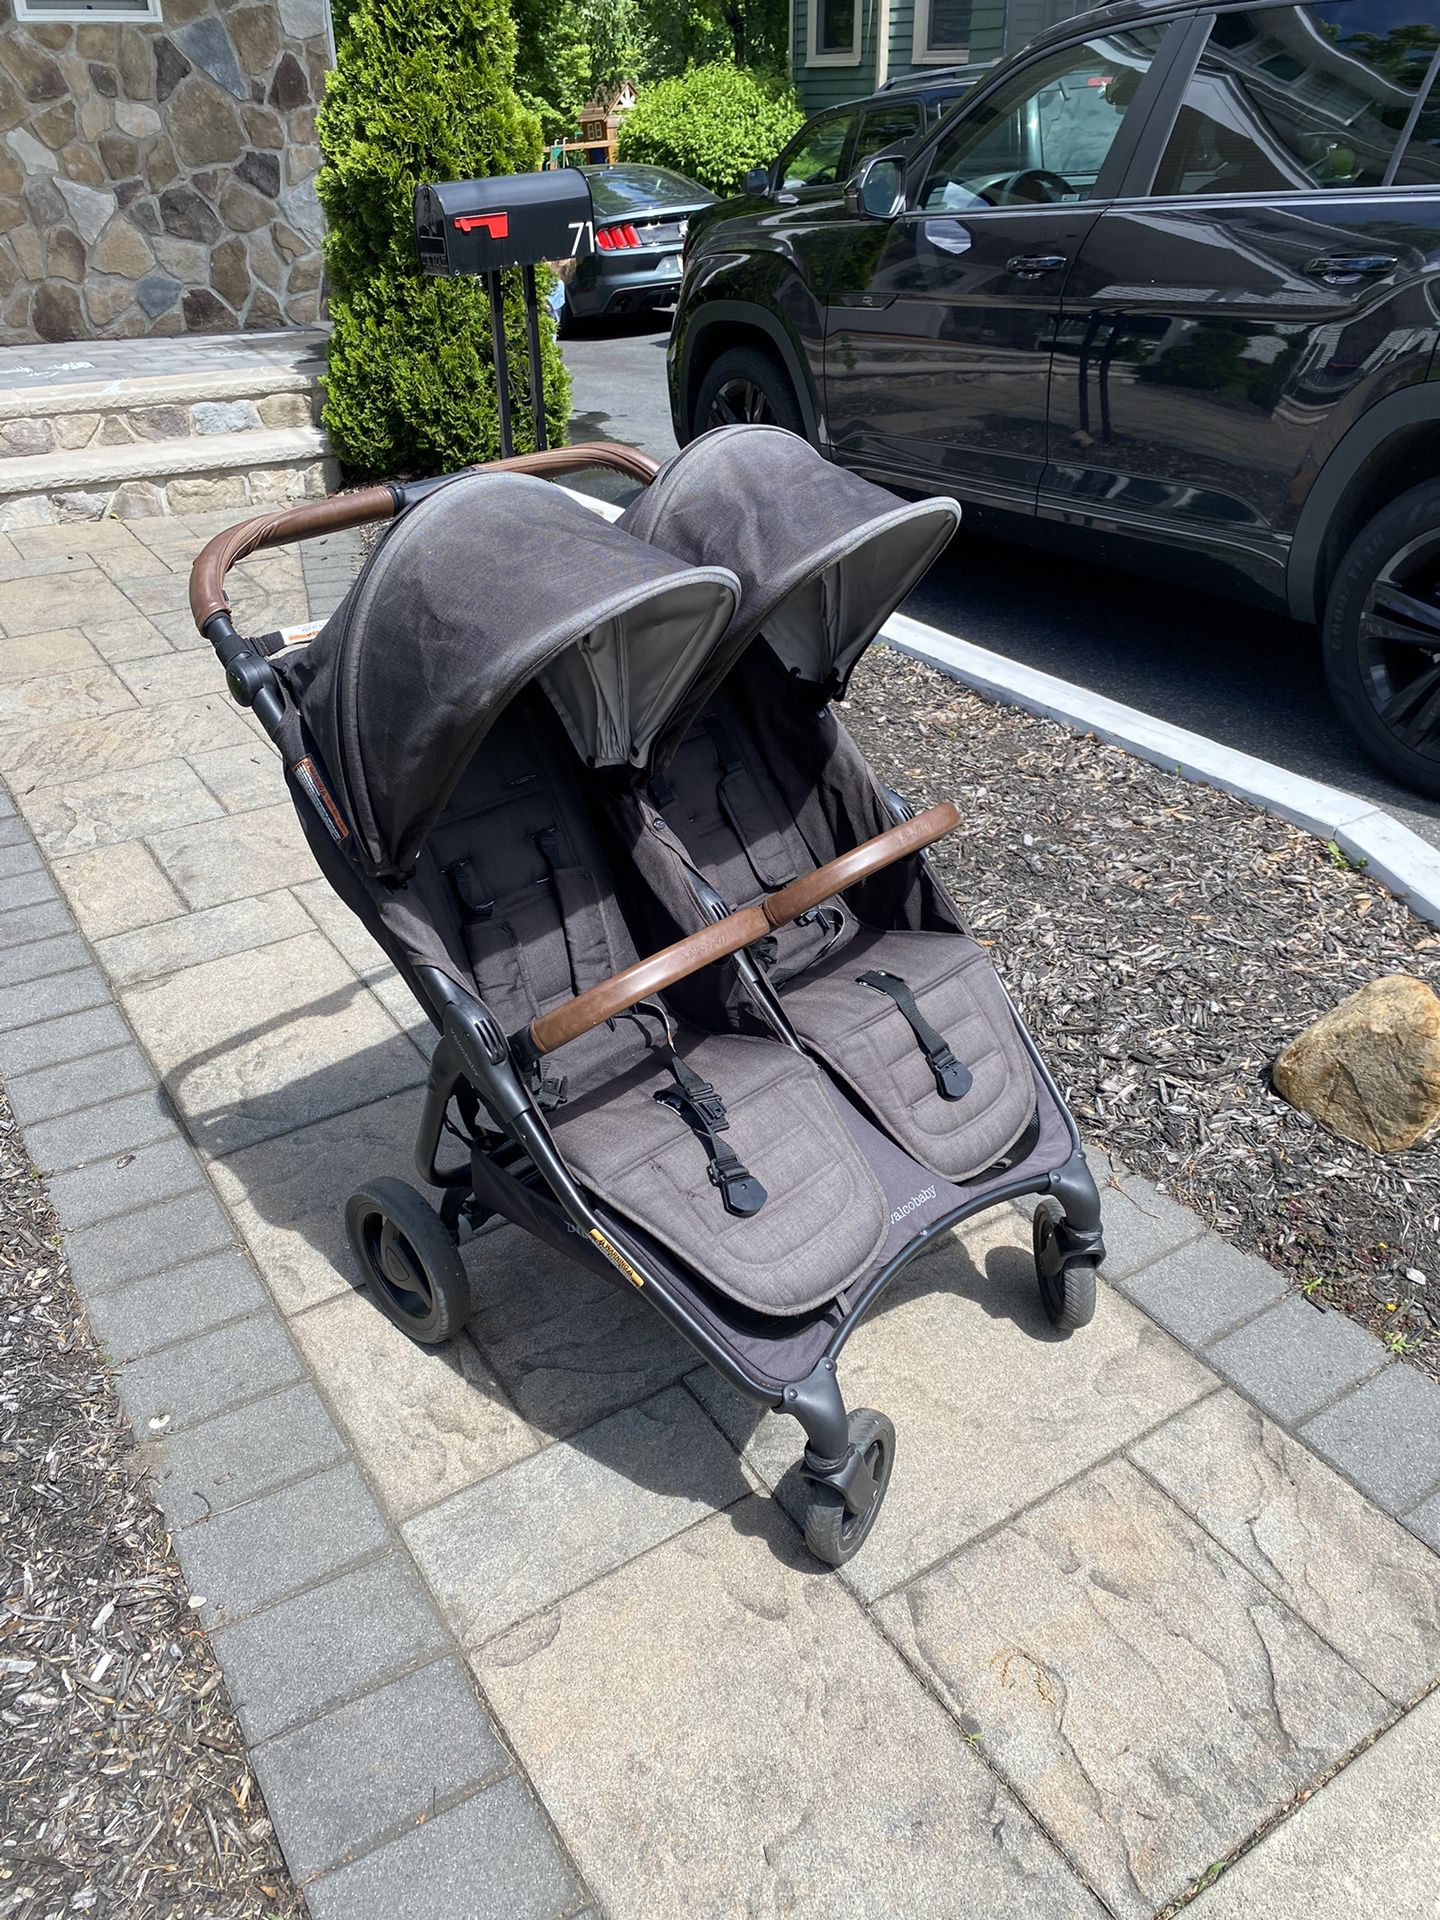 Valco Double Stroller With Replacement Fabric